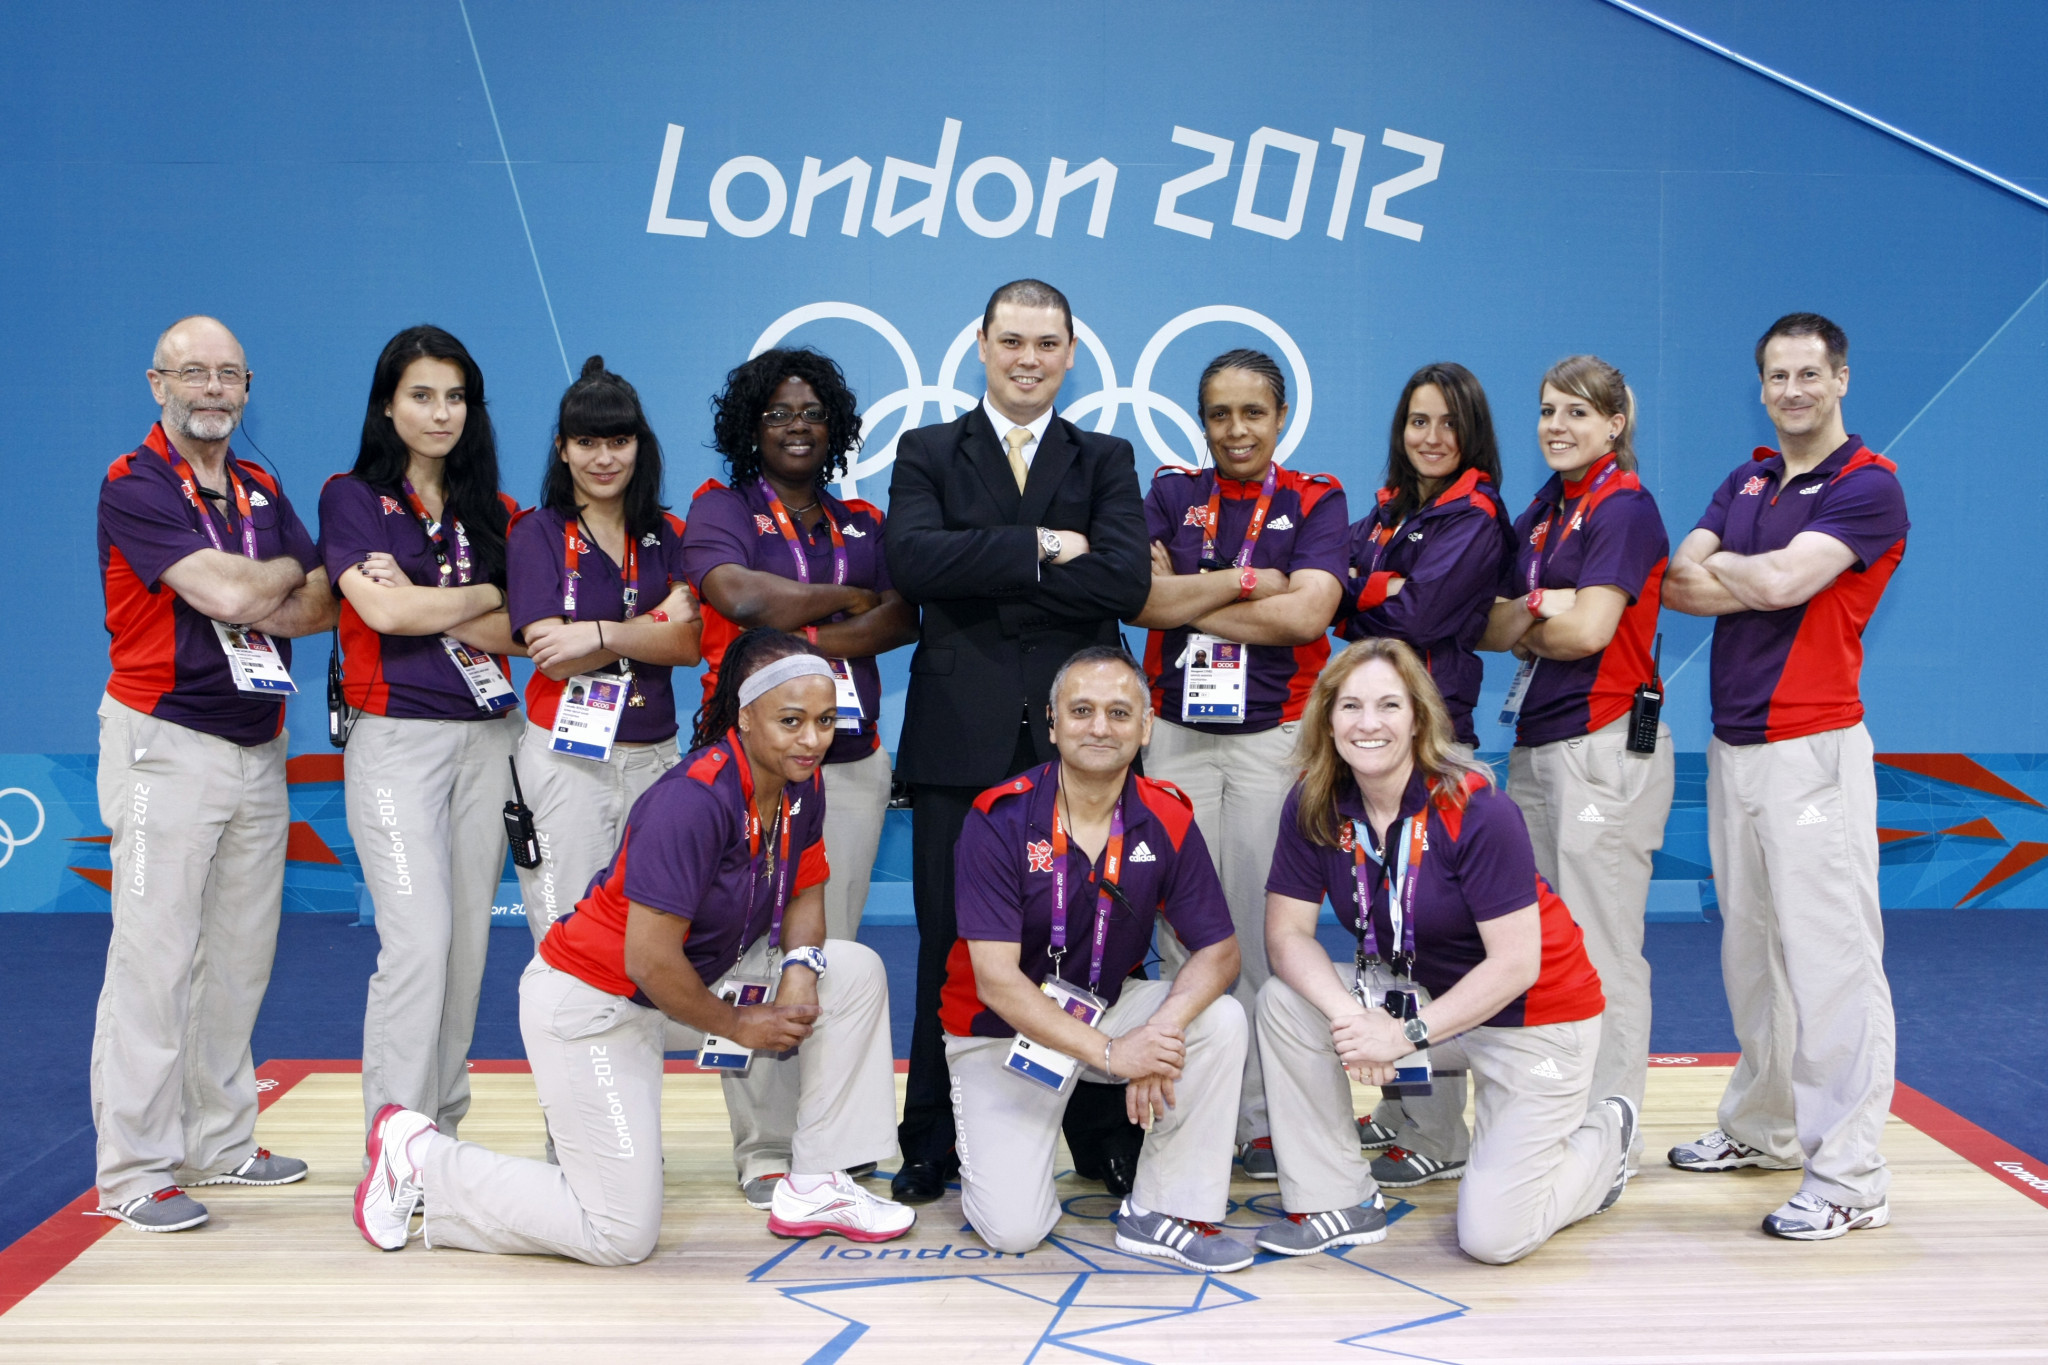 Matthew Curtain, in suit, was weightlifting manager at London 2012 ©Matthew Curtain